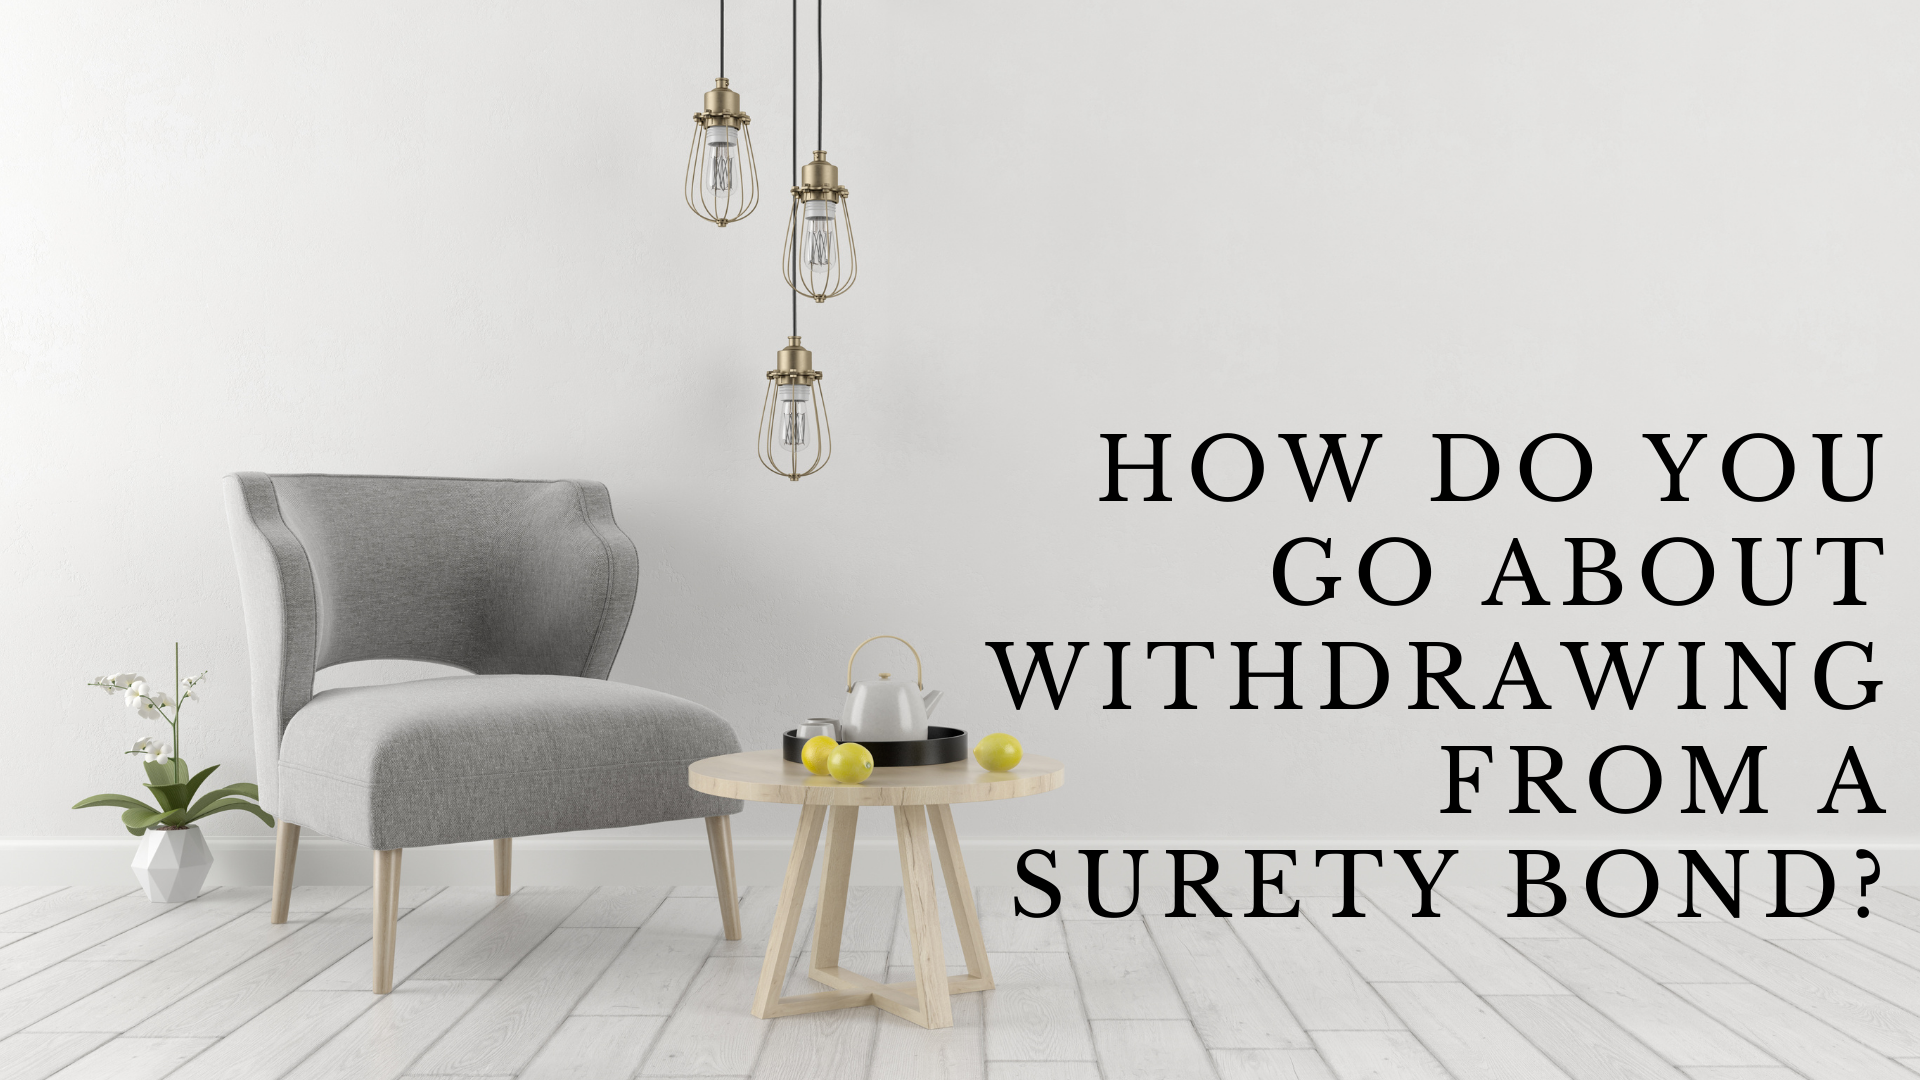 surety bond - How do you go about withdrawing from a surety bond - minimalist interior